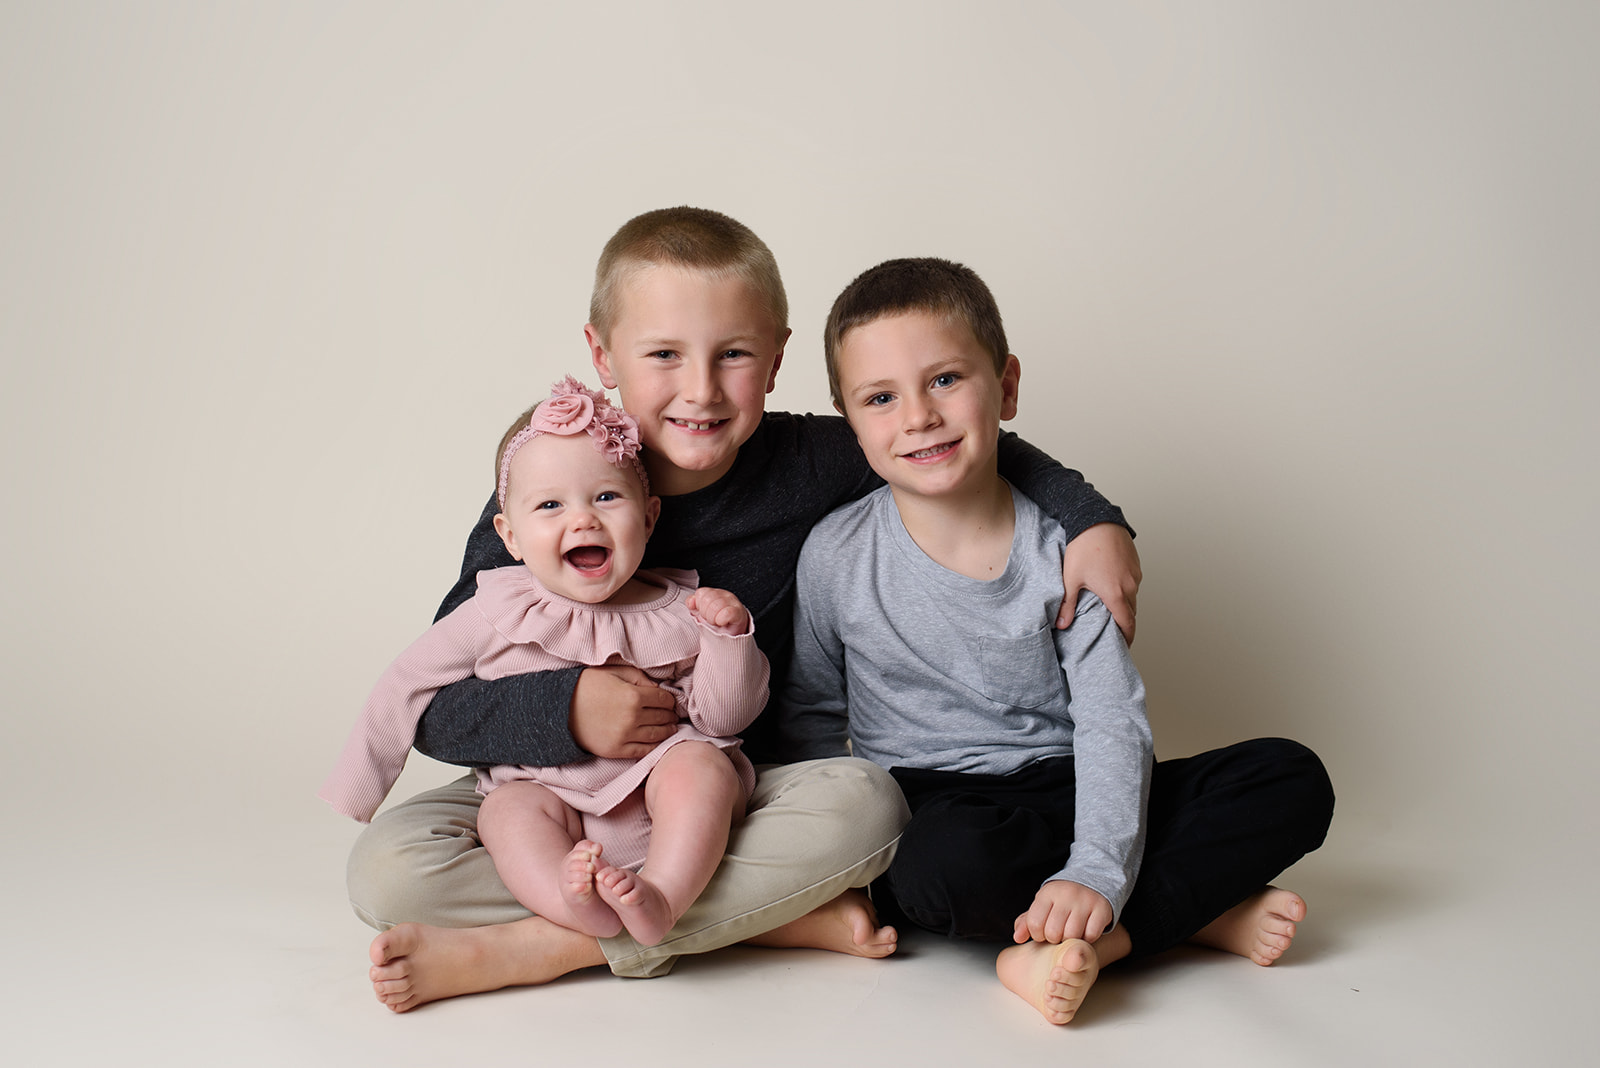 A sibling photo during a 6 month milestone session at Rachel Mummert Photography